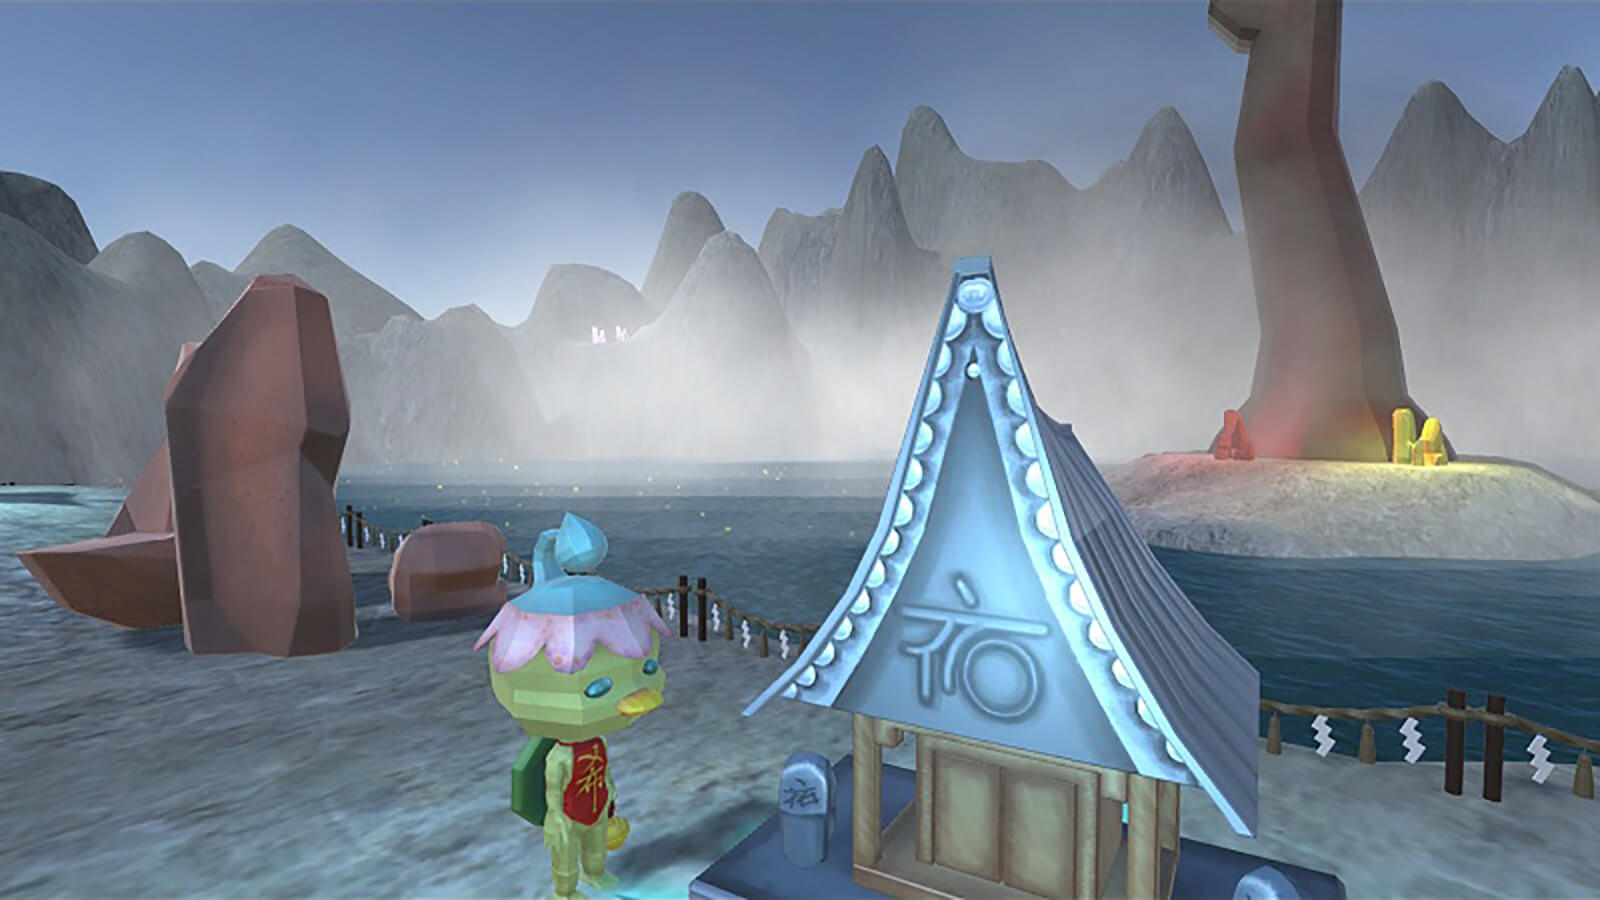 The player's kappa character stands at a small shrine on the shore, with a lake and misty mountains in the background